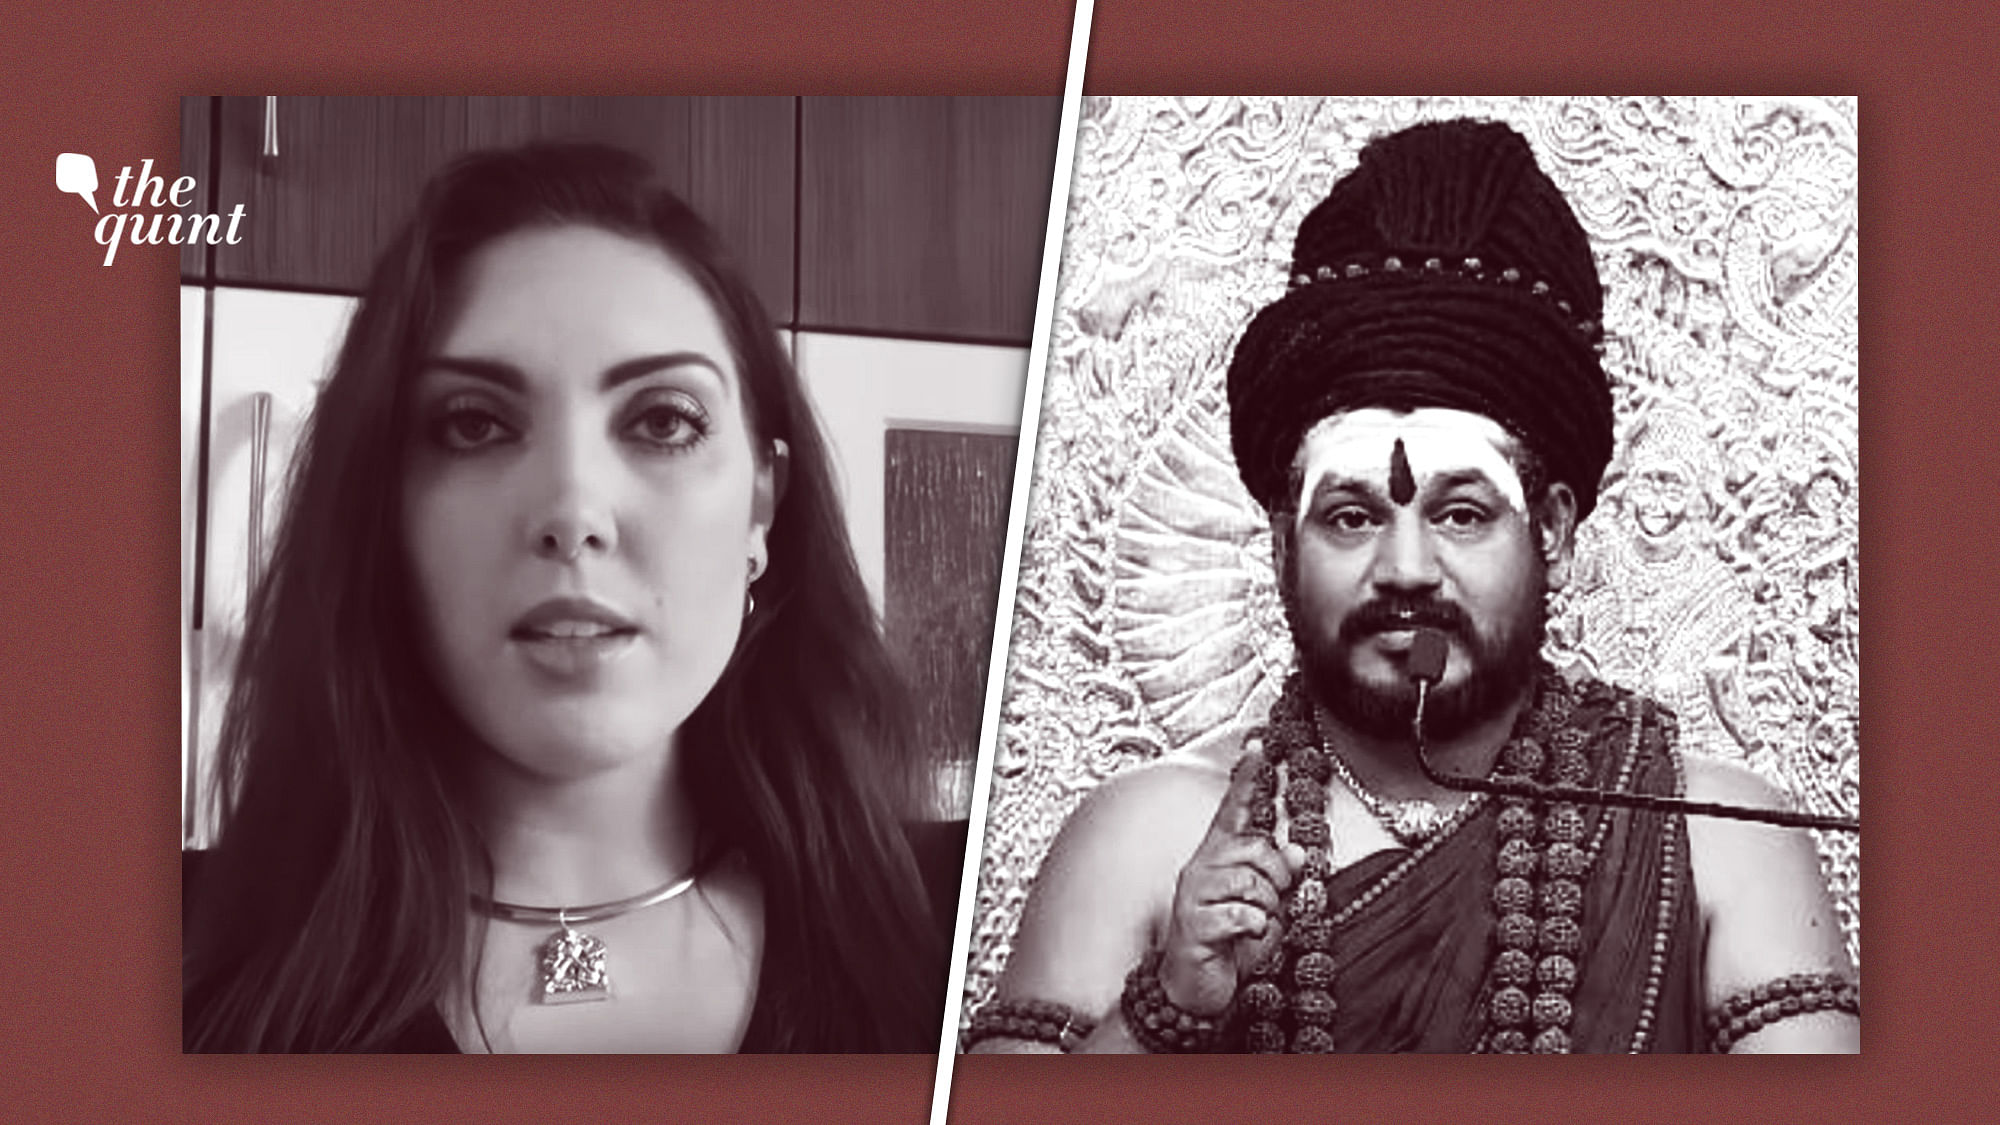 Nithyananda has been accused of wrongs by an ex-disciple.&nbsp;